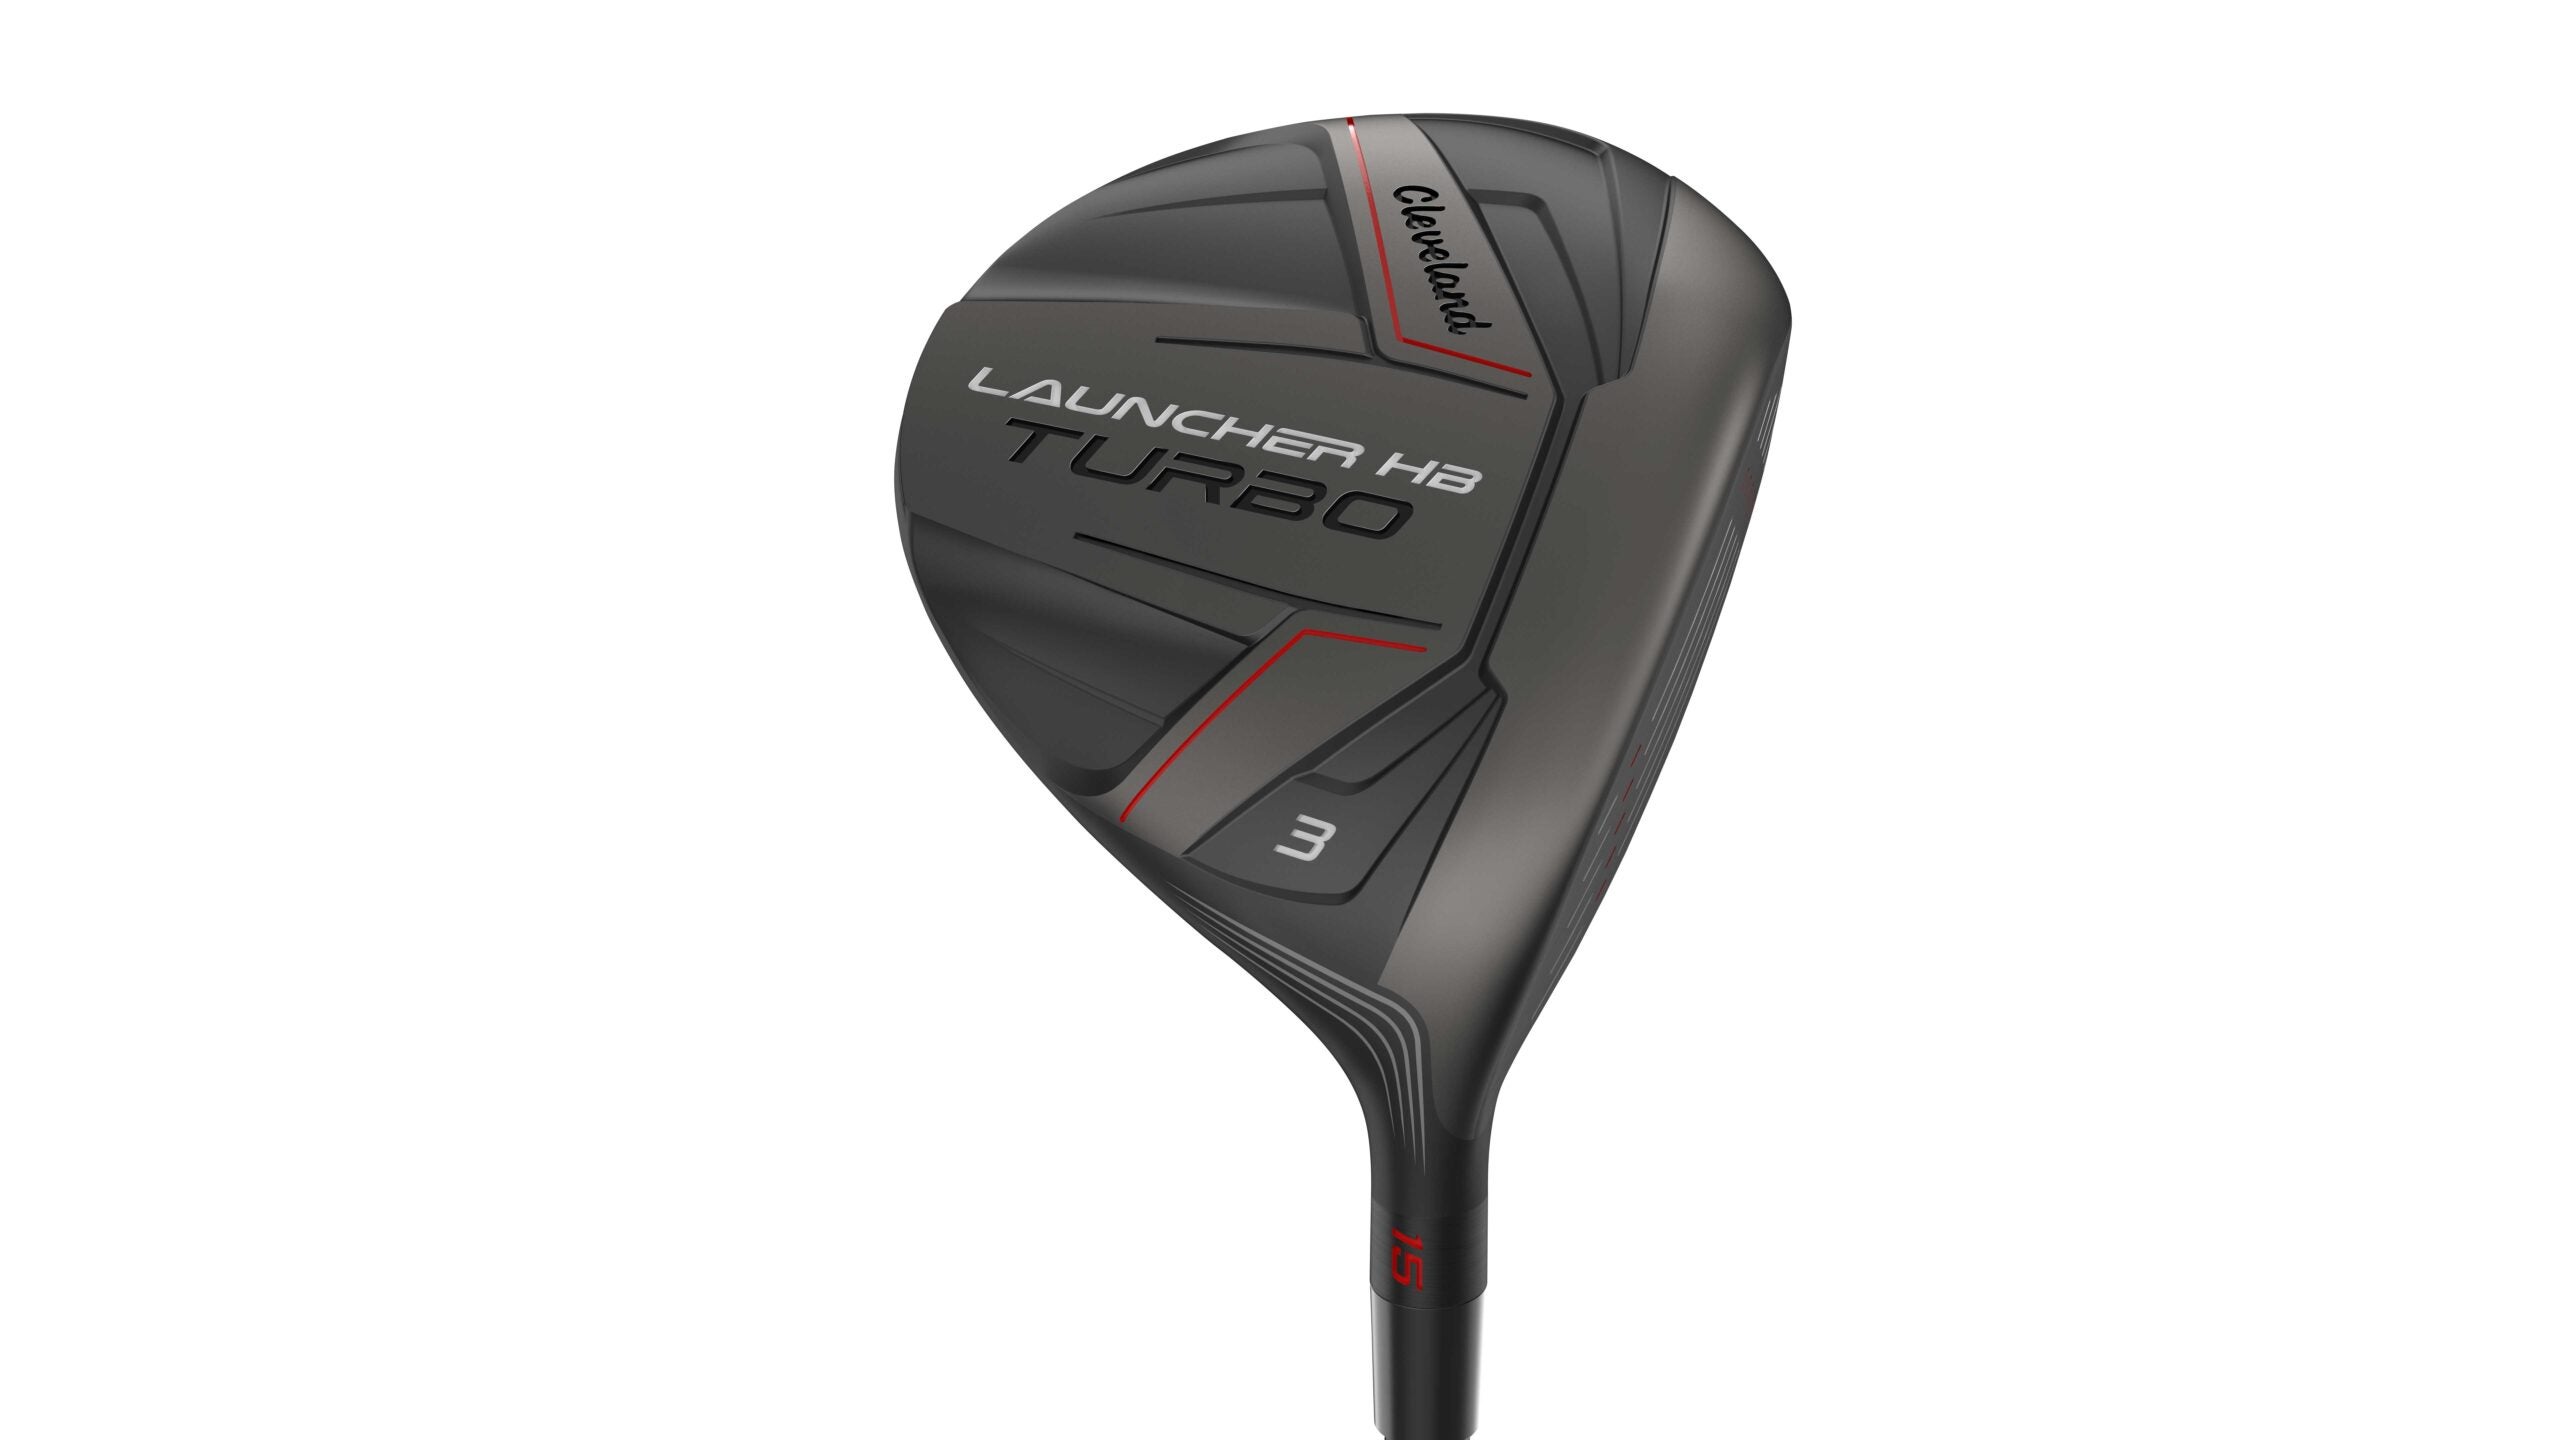 Cleveland Launcher HB Turbo fairway wood: ClubTest 2021 review